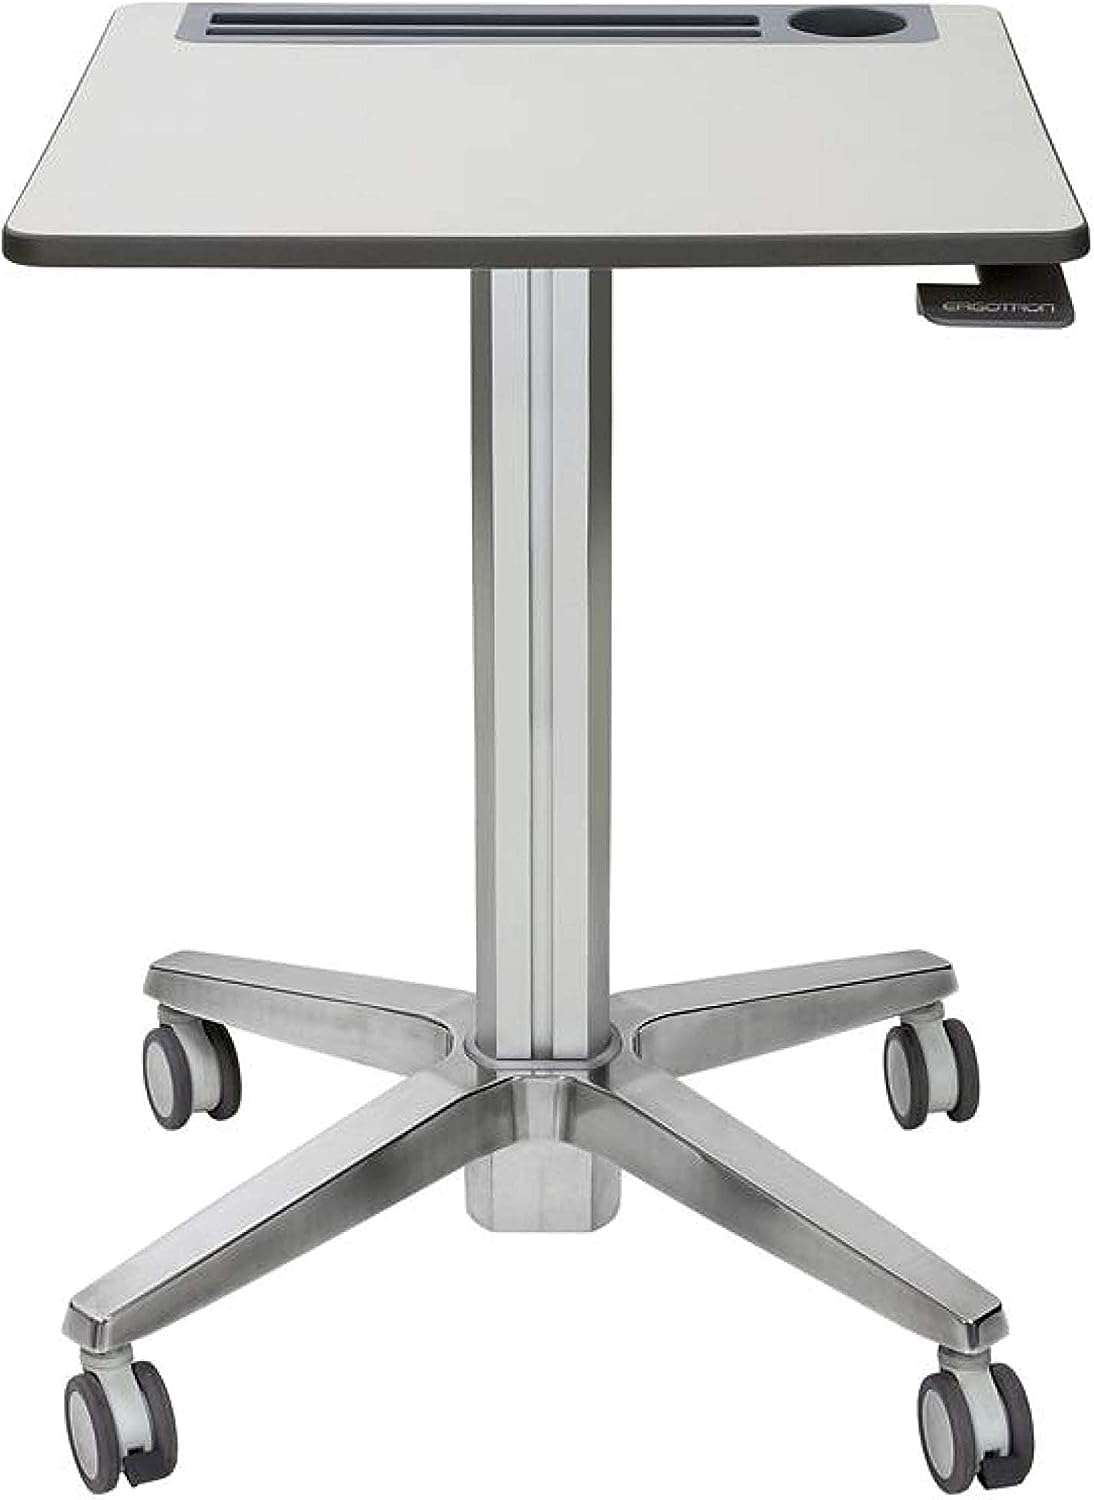 Home Office Must-have Products - Standing Desks